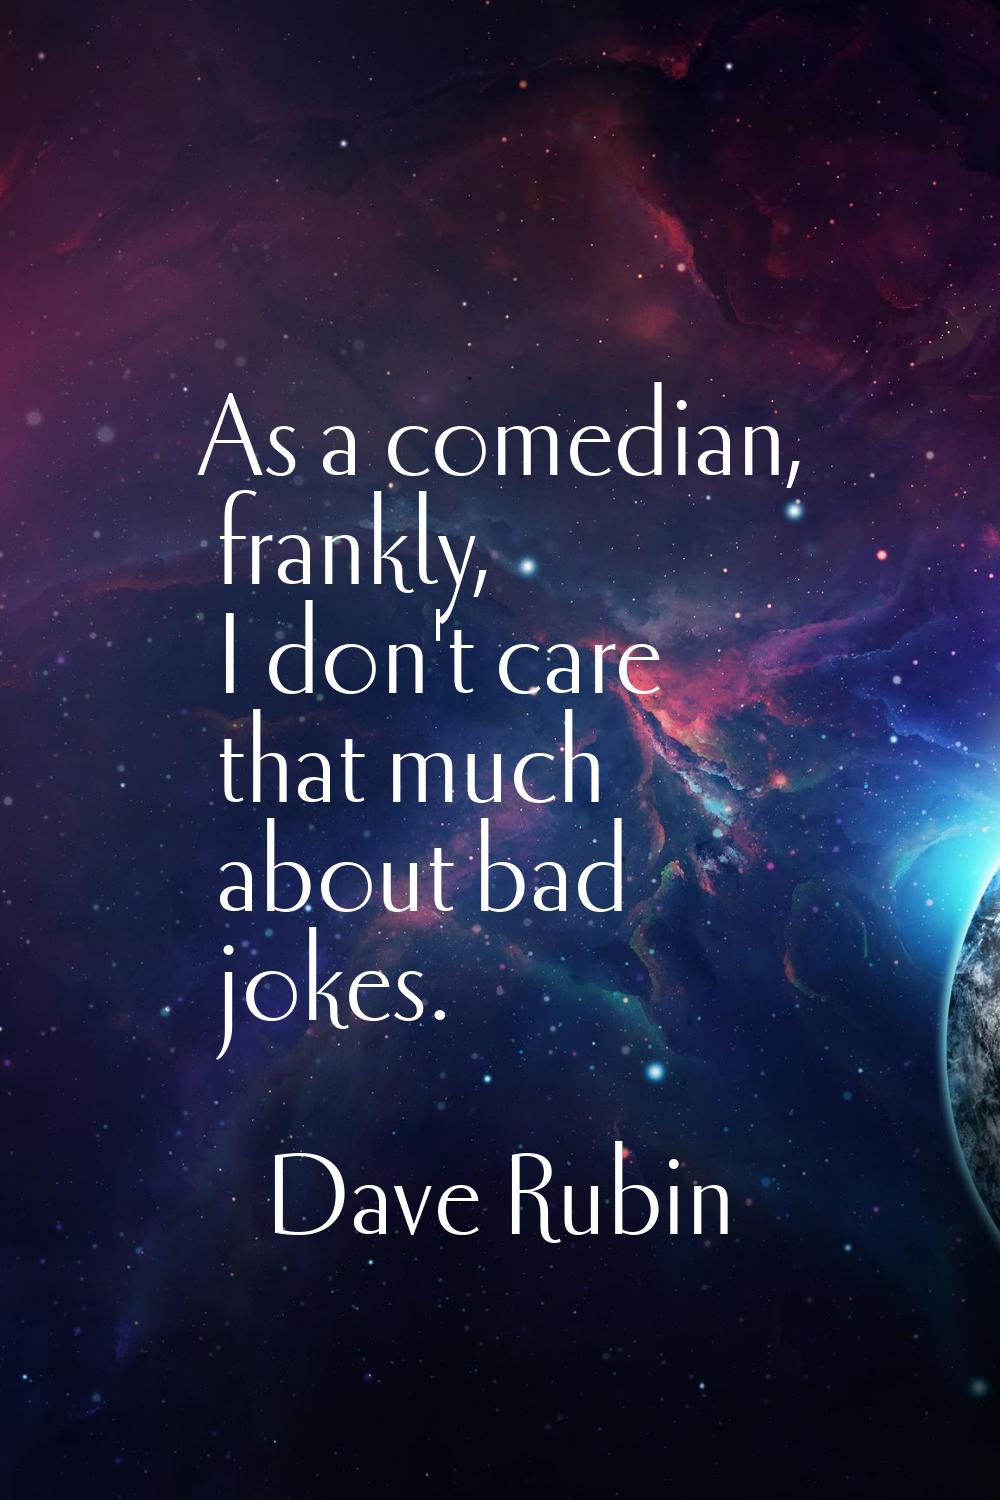 As a comedian, frankly, I don't care that much about bad jokes.